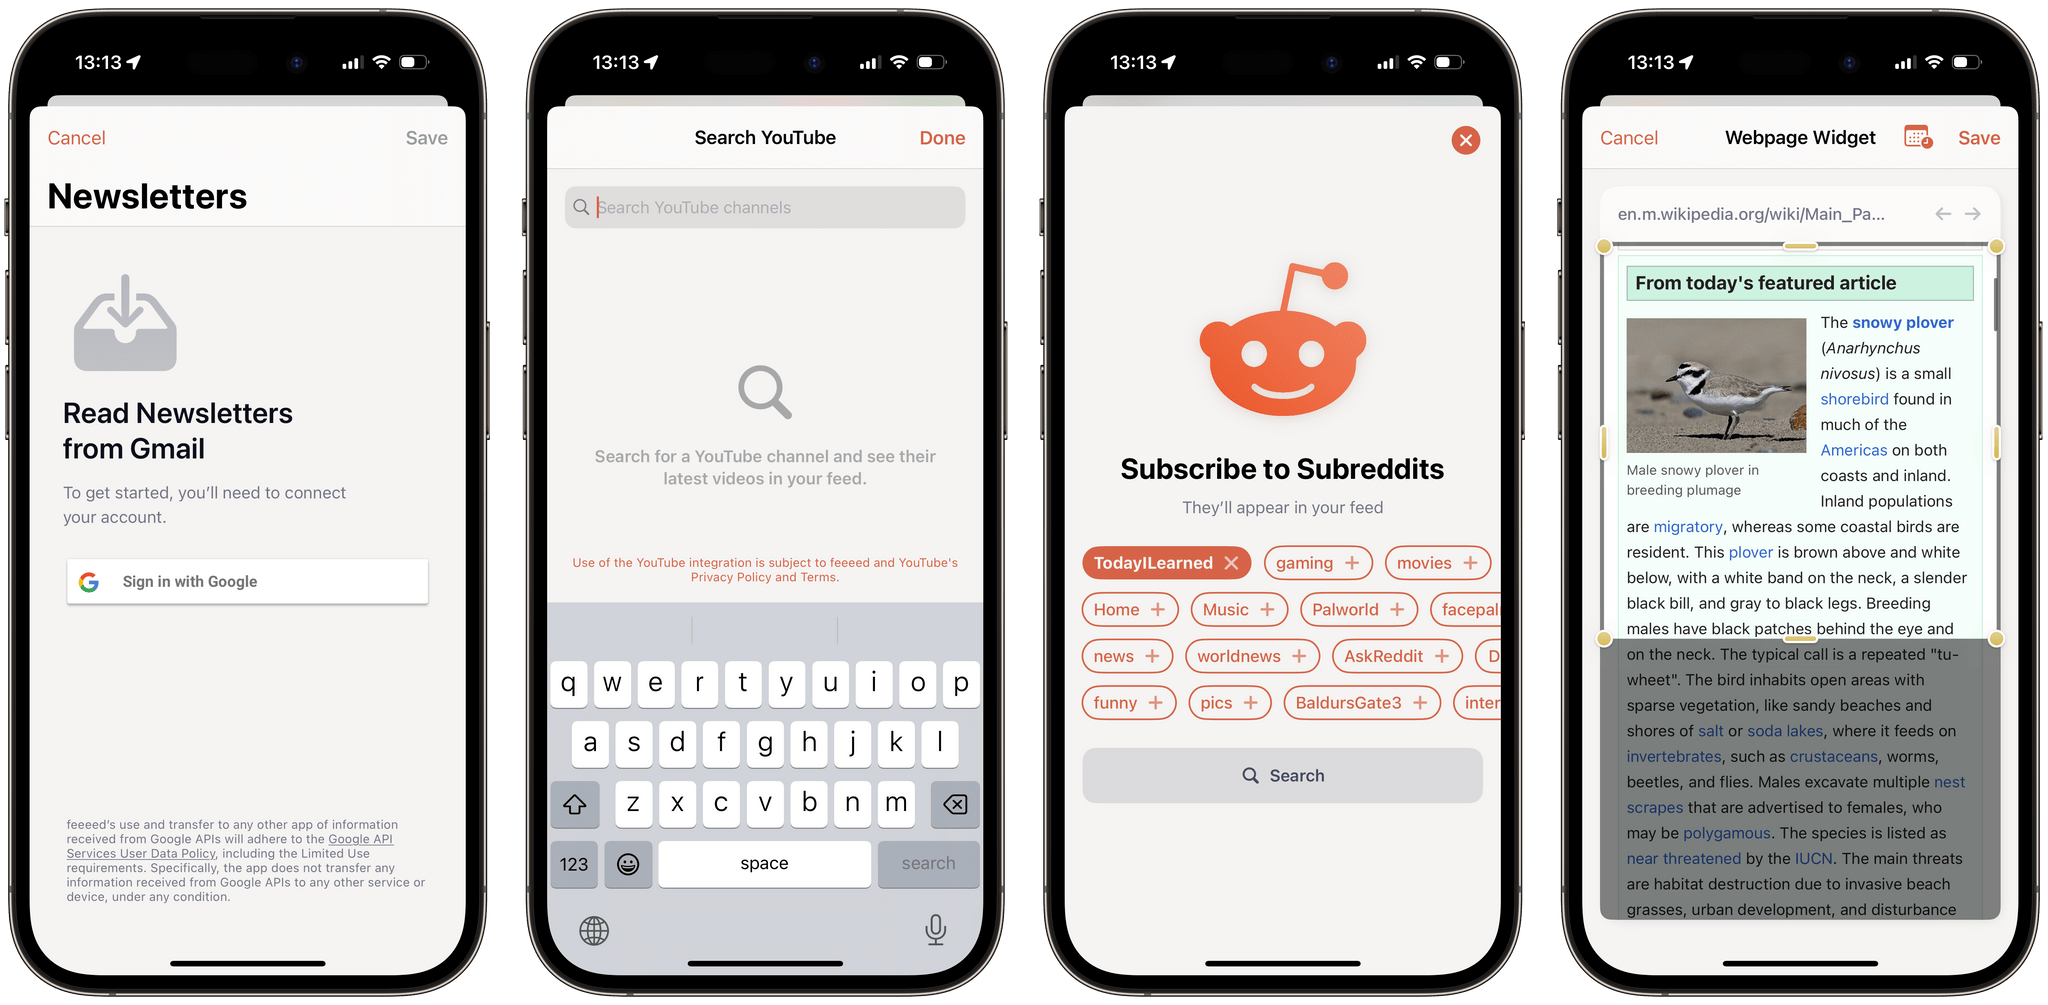 feeeed allows you to connect your Gmail account to read newsletters in the app. It lets you subscribe to YouTube channels, Subreddits, and even manually select an area on a website.